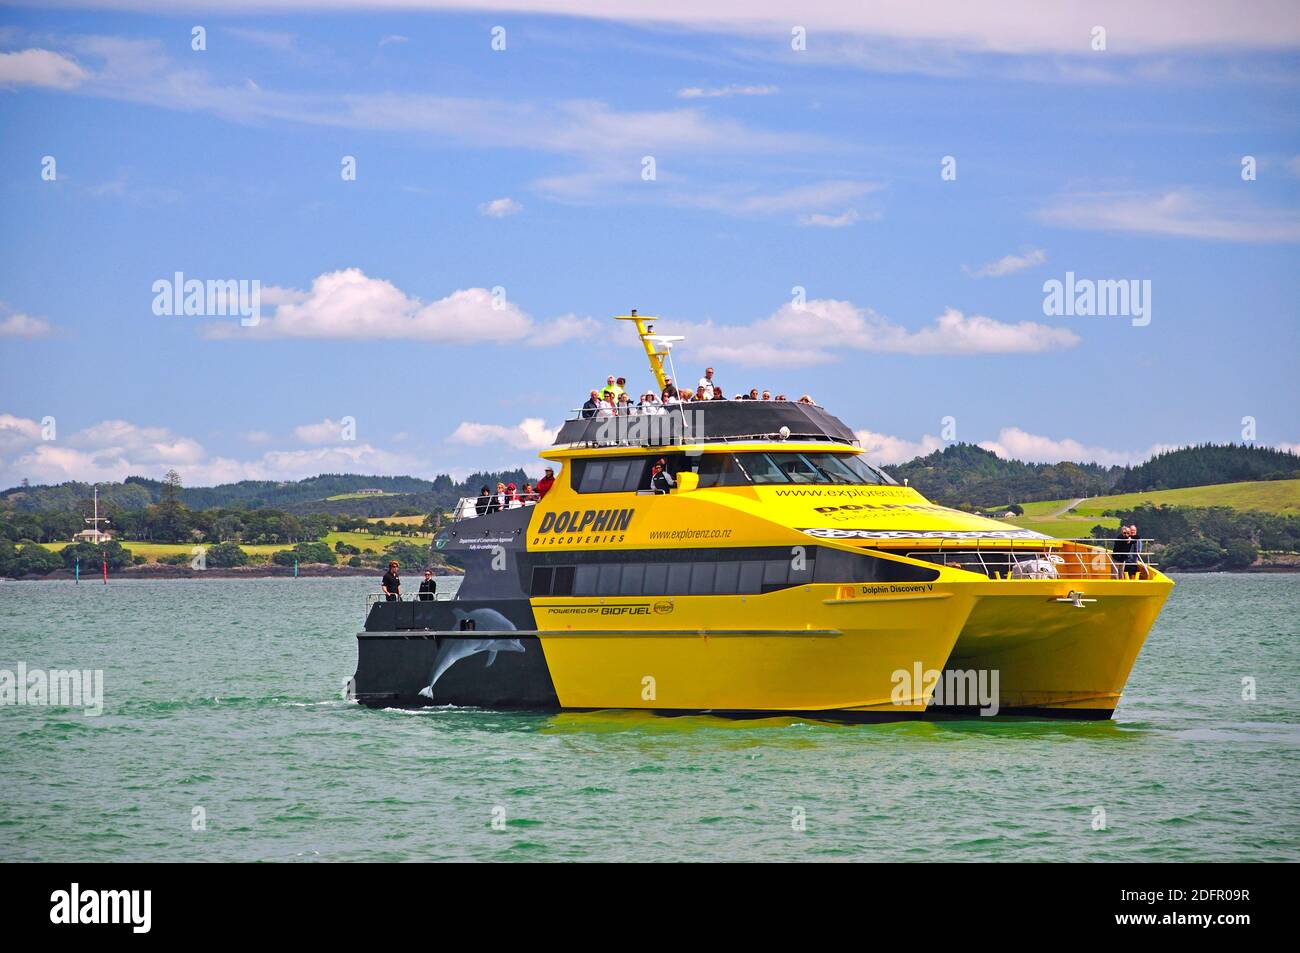 Dolphin Cruise boat, Russell, Bay of Islands, Northland Region, North Island, New Zealand Stock Photo